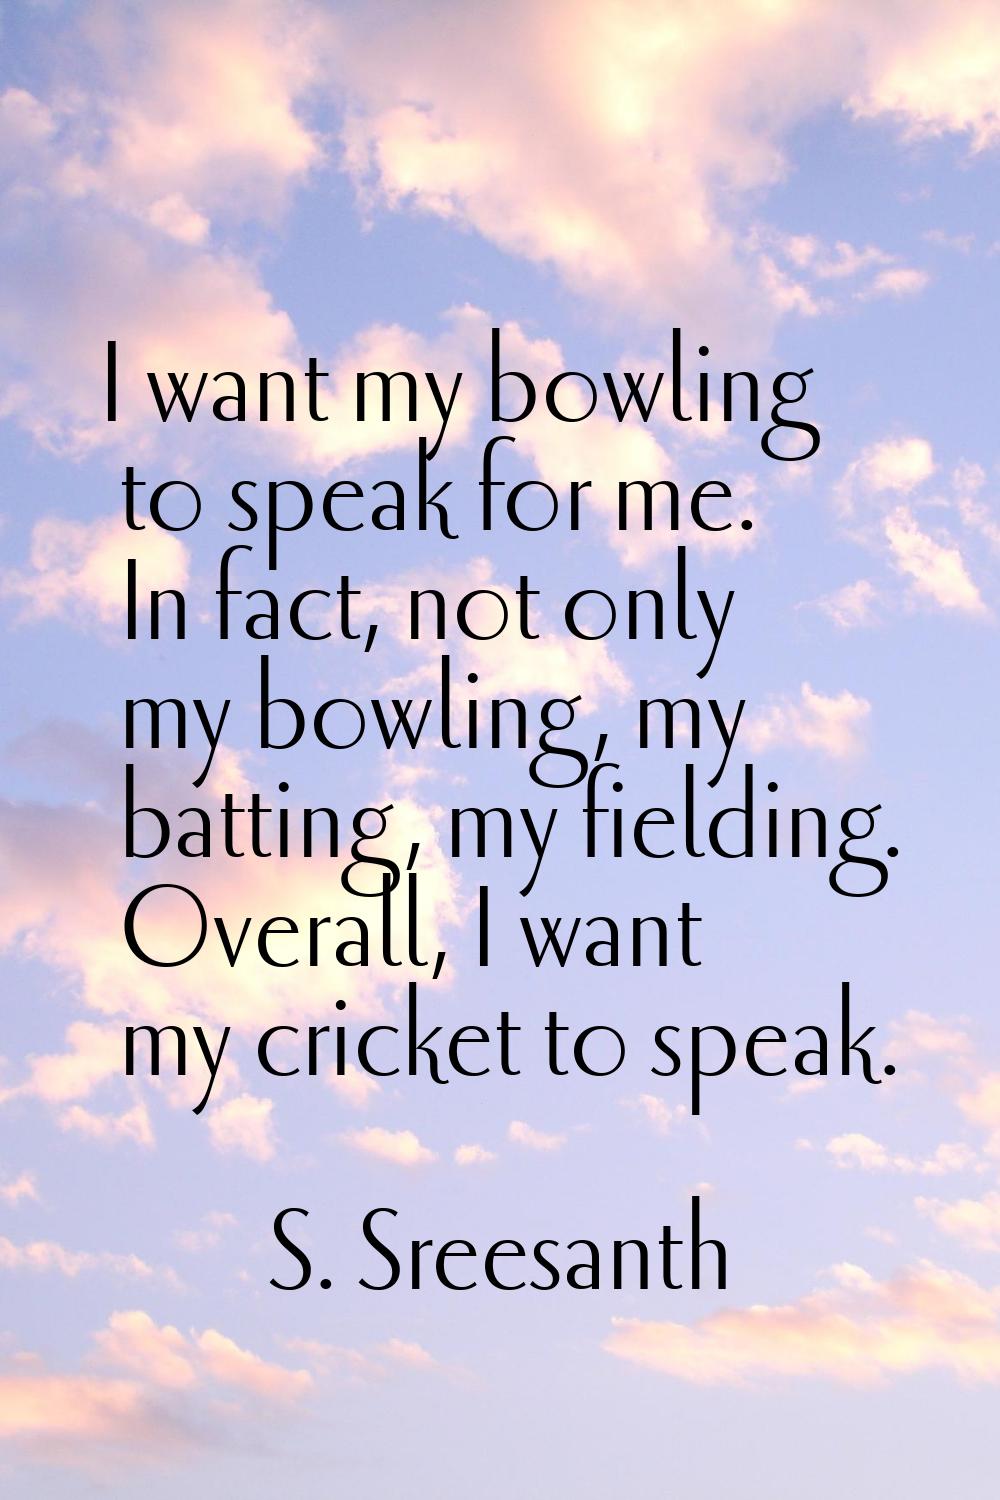 I want my bowling to speak for me. In fact, not only my bowling, my batting, my fielding. Overall, 